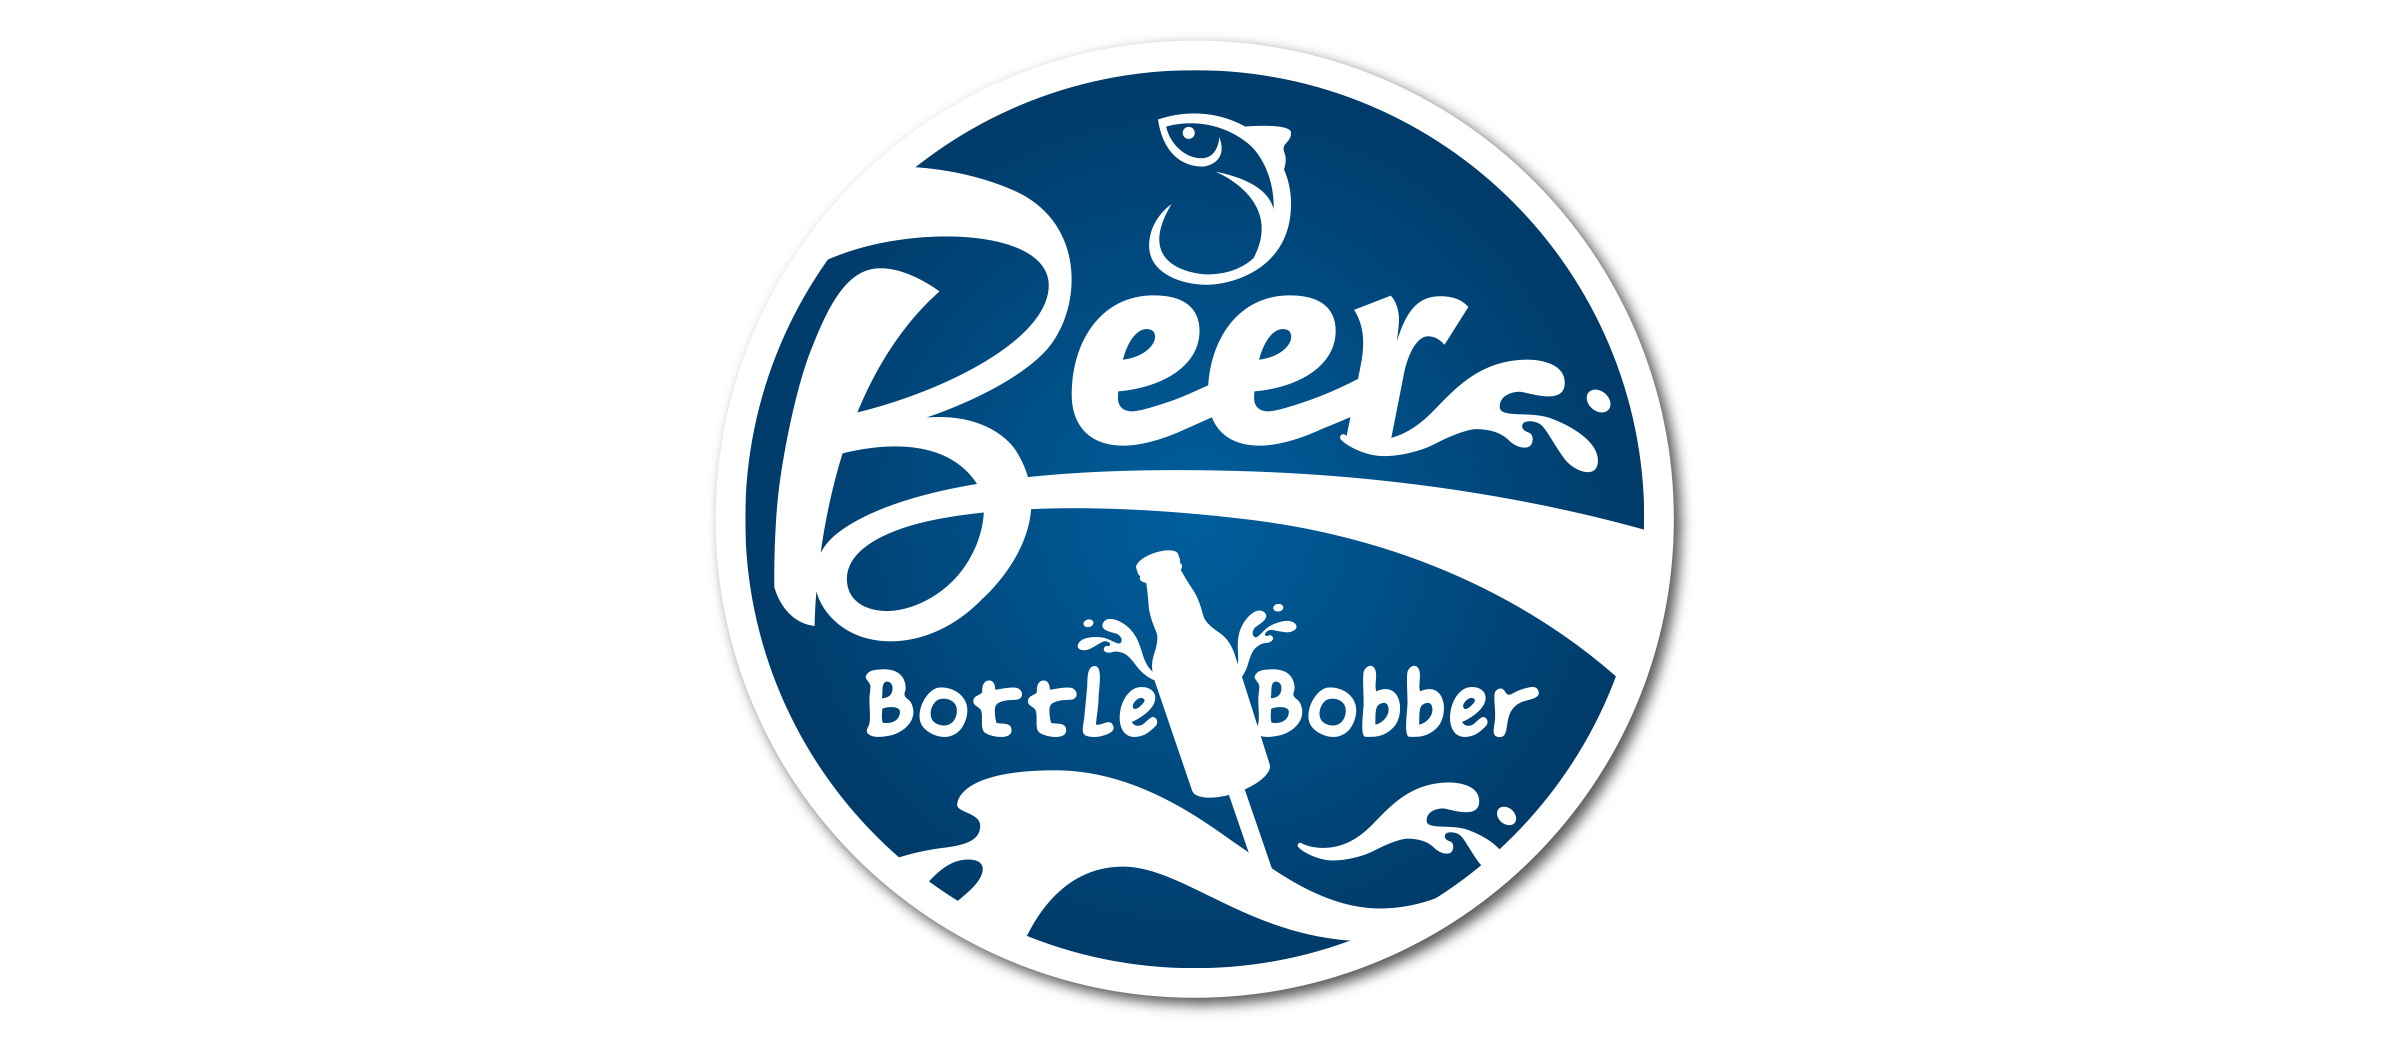 The Beer Bottle Bobber adds an extra bit of joy to any fishing trip.